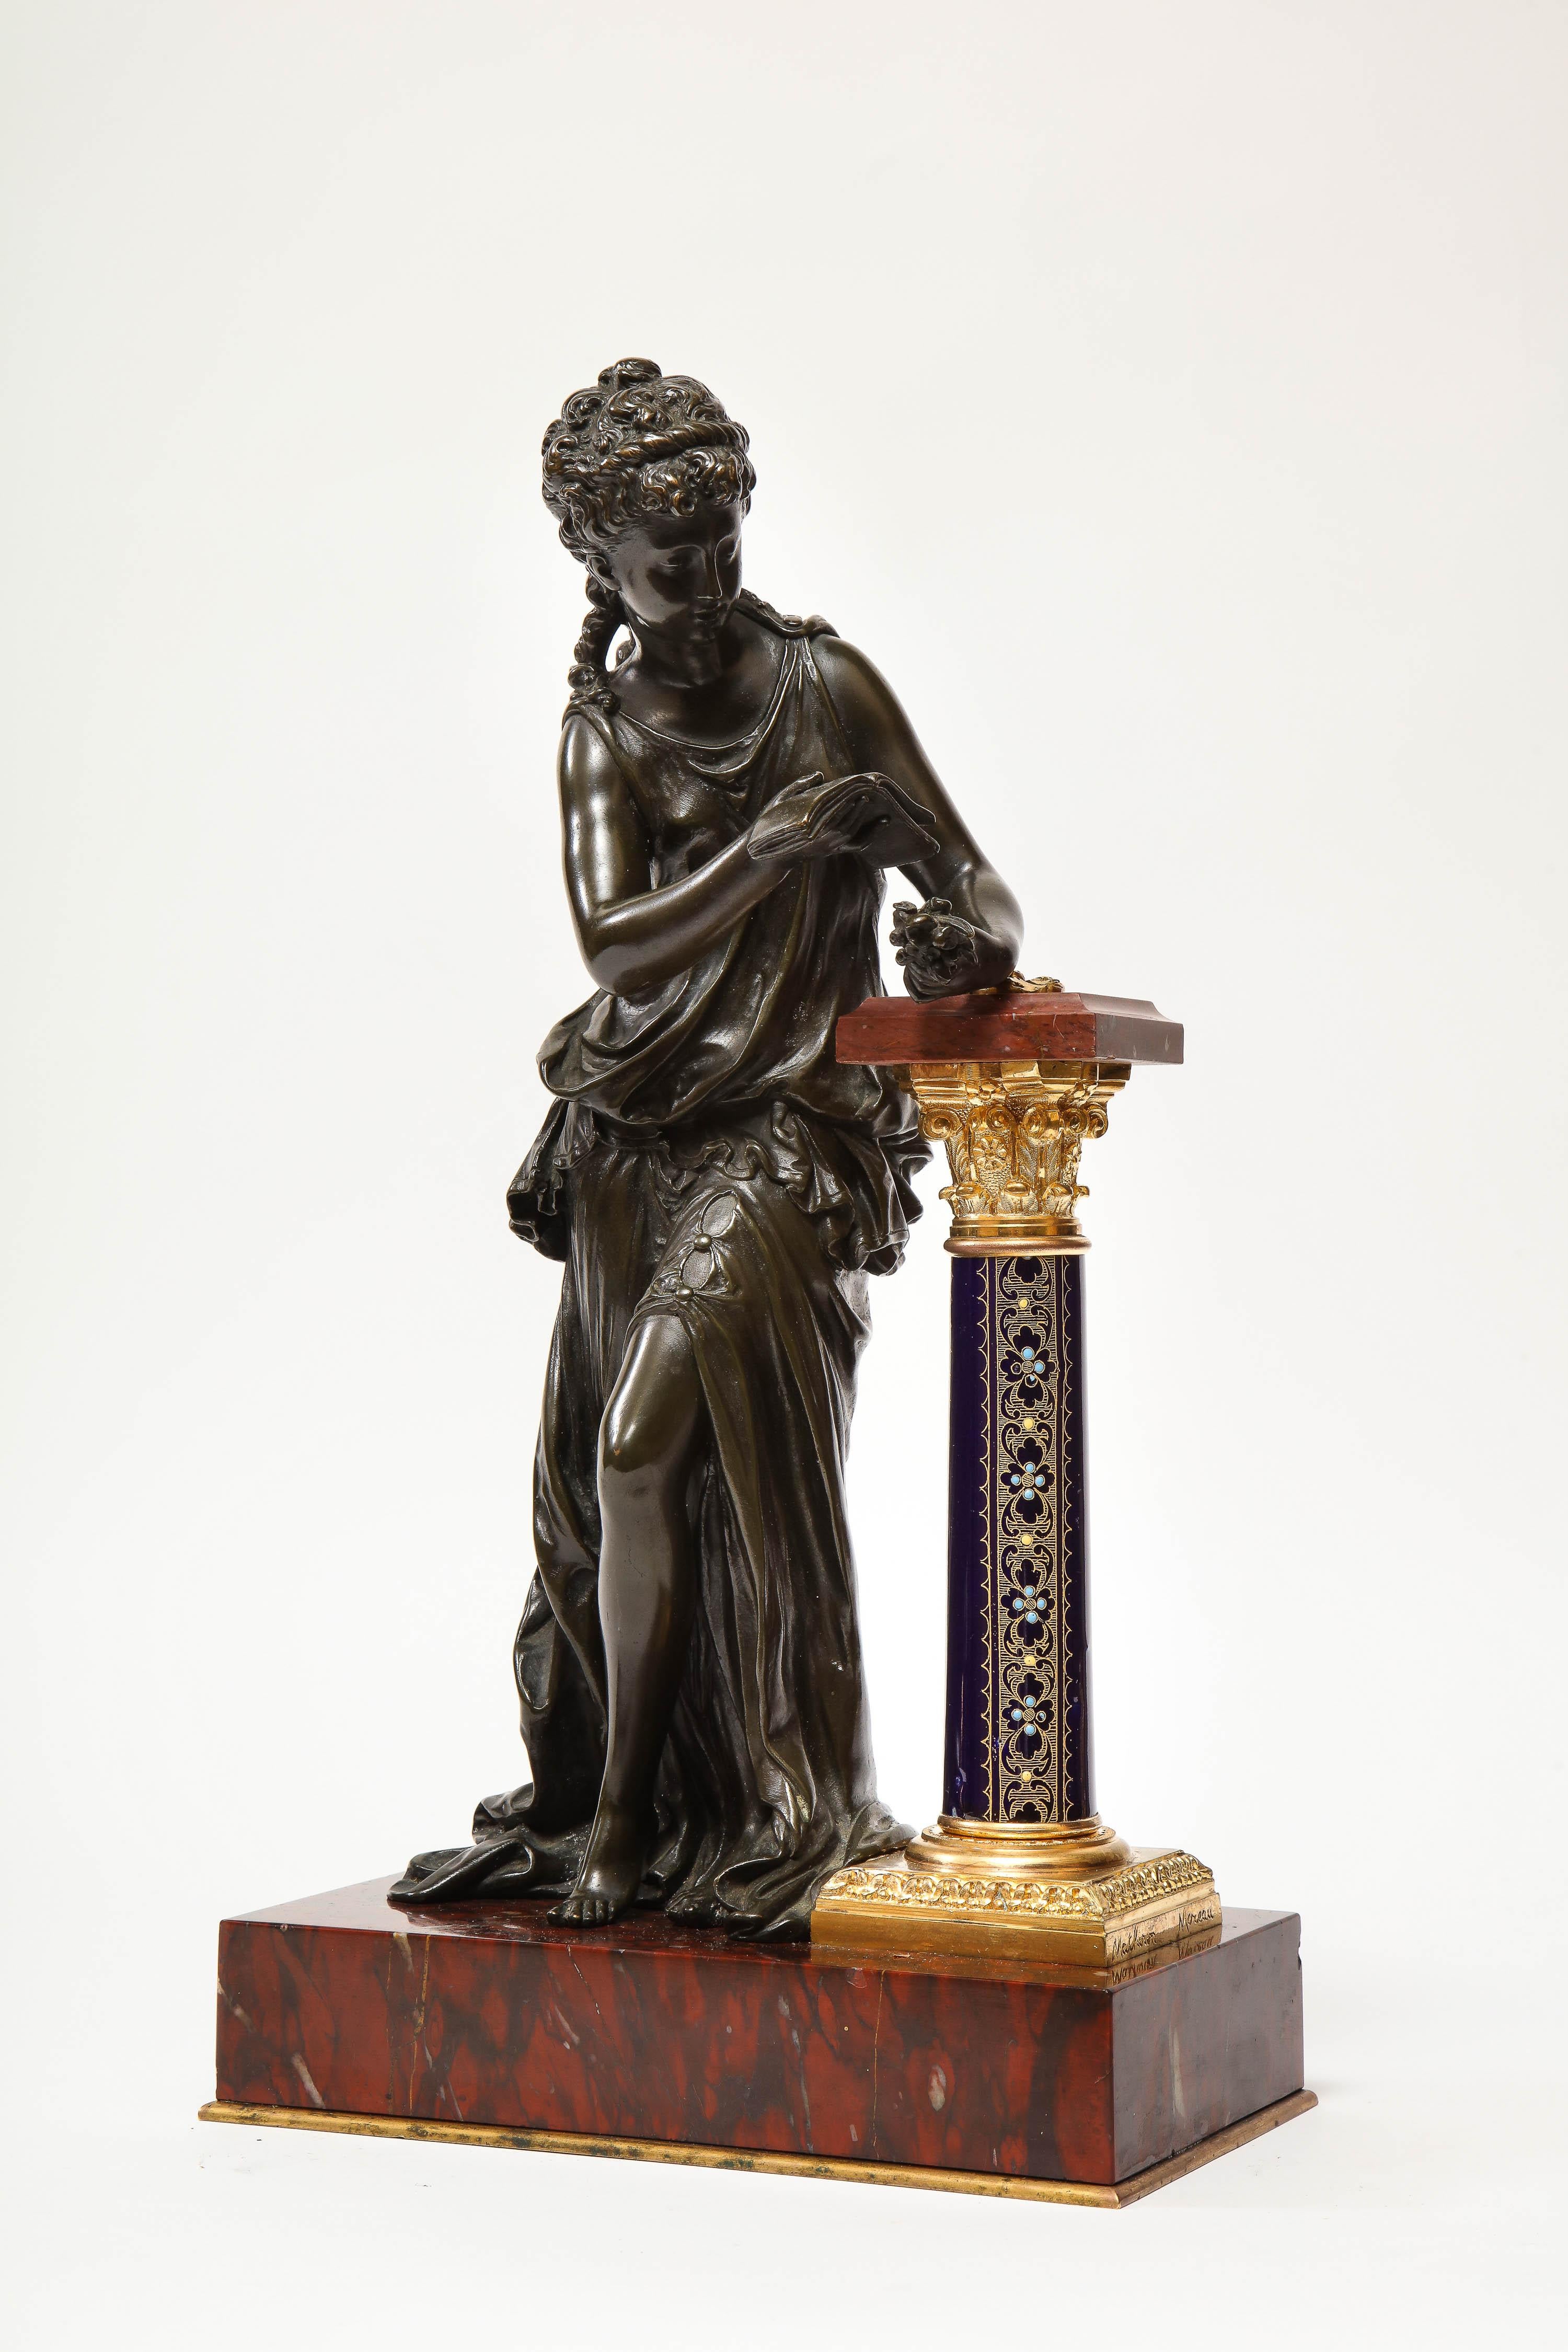 An Exquisite French gilt and patinated bronze sculpture of Venus, resting on a Sèvres style cobalt blue enameled porcelain pedestal, on rouge marble base, by Mathurin Moreau, circa 1880.

This sculpture is not an ordinary one. It's very rare,